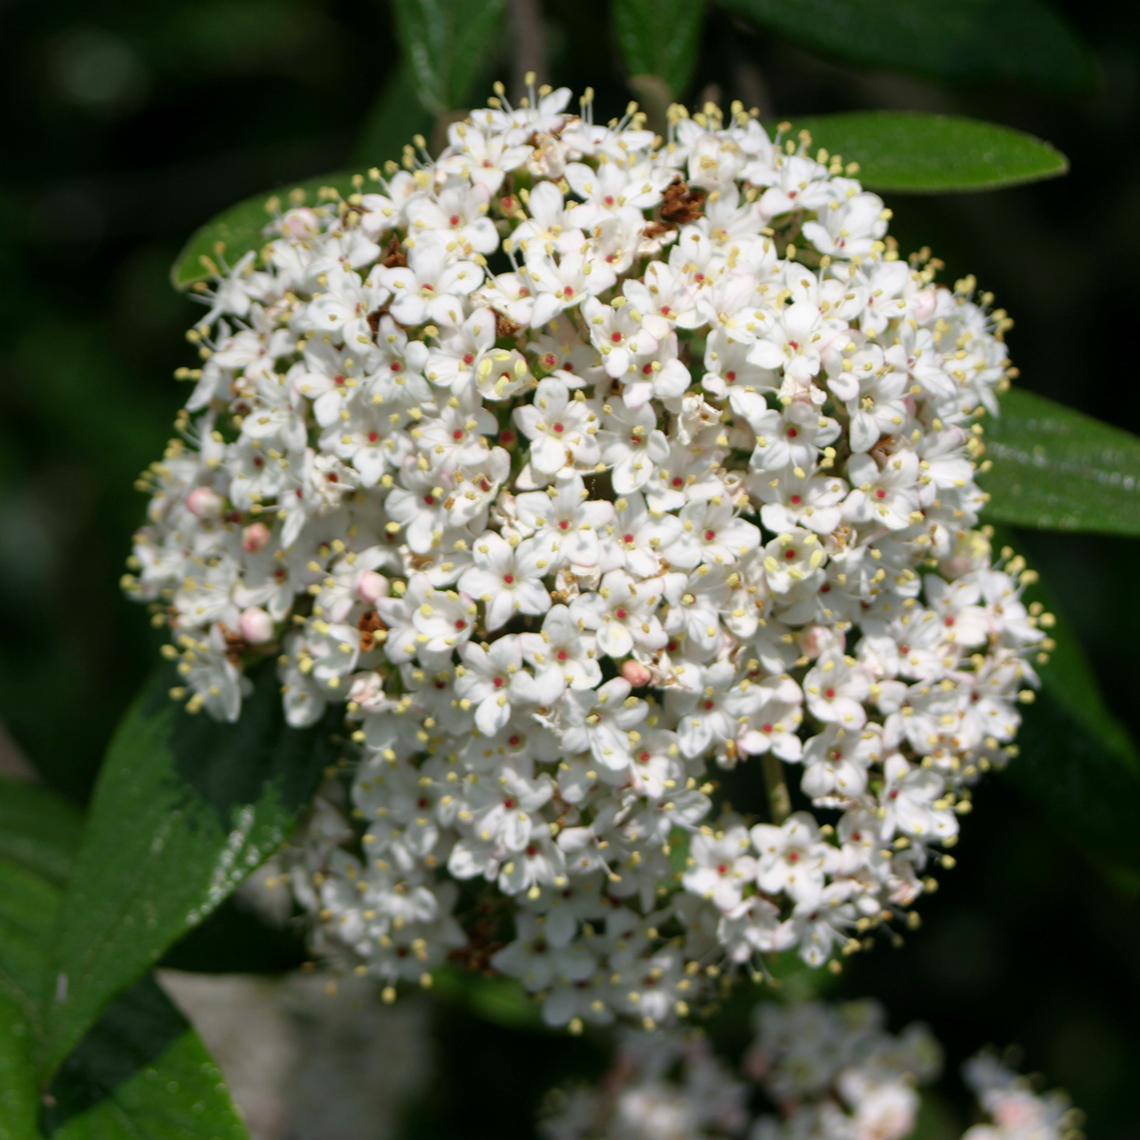 A large white flower cluster on Decker viburnum with each floret dotted orange in the center